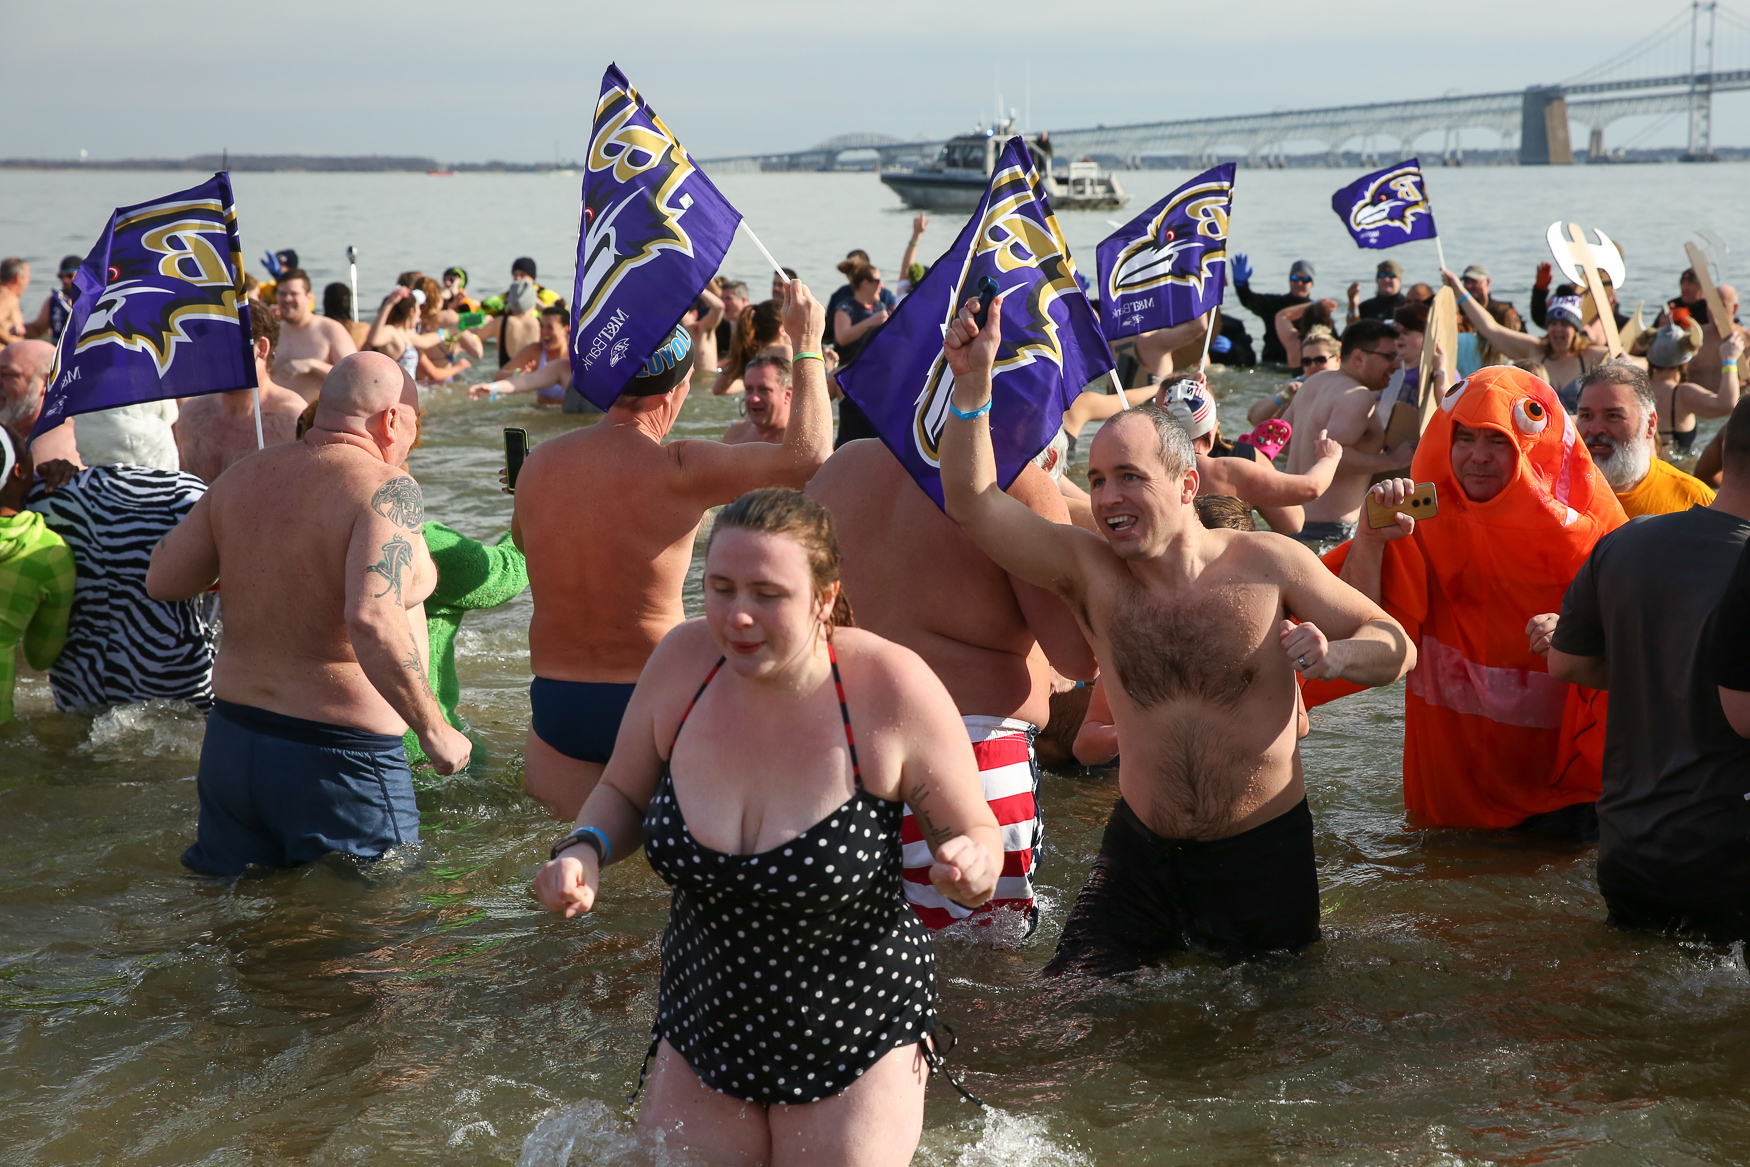 Thousands brace the cold for the 2019 Polar Bear Plunge DC Refined